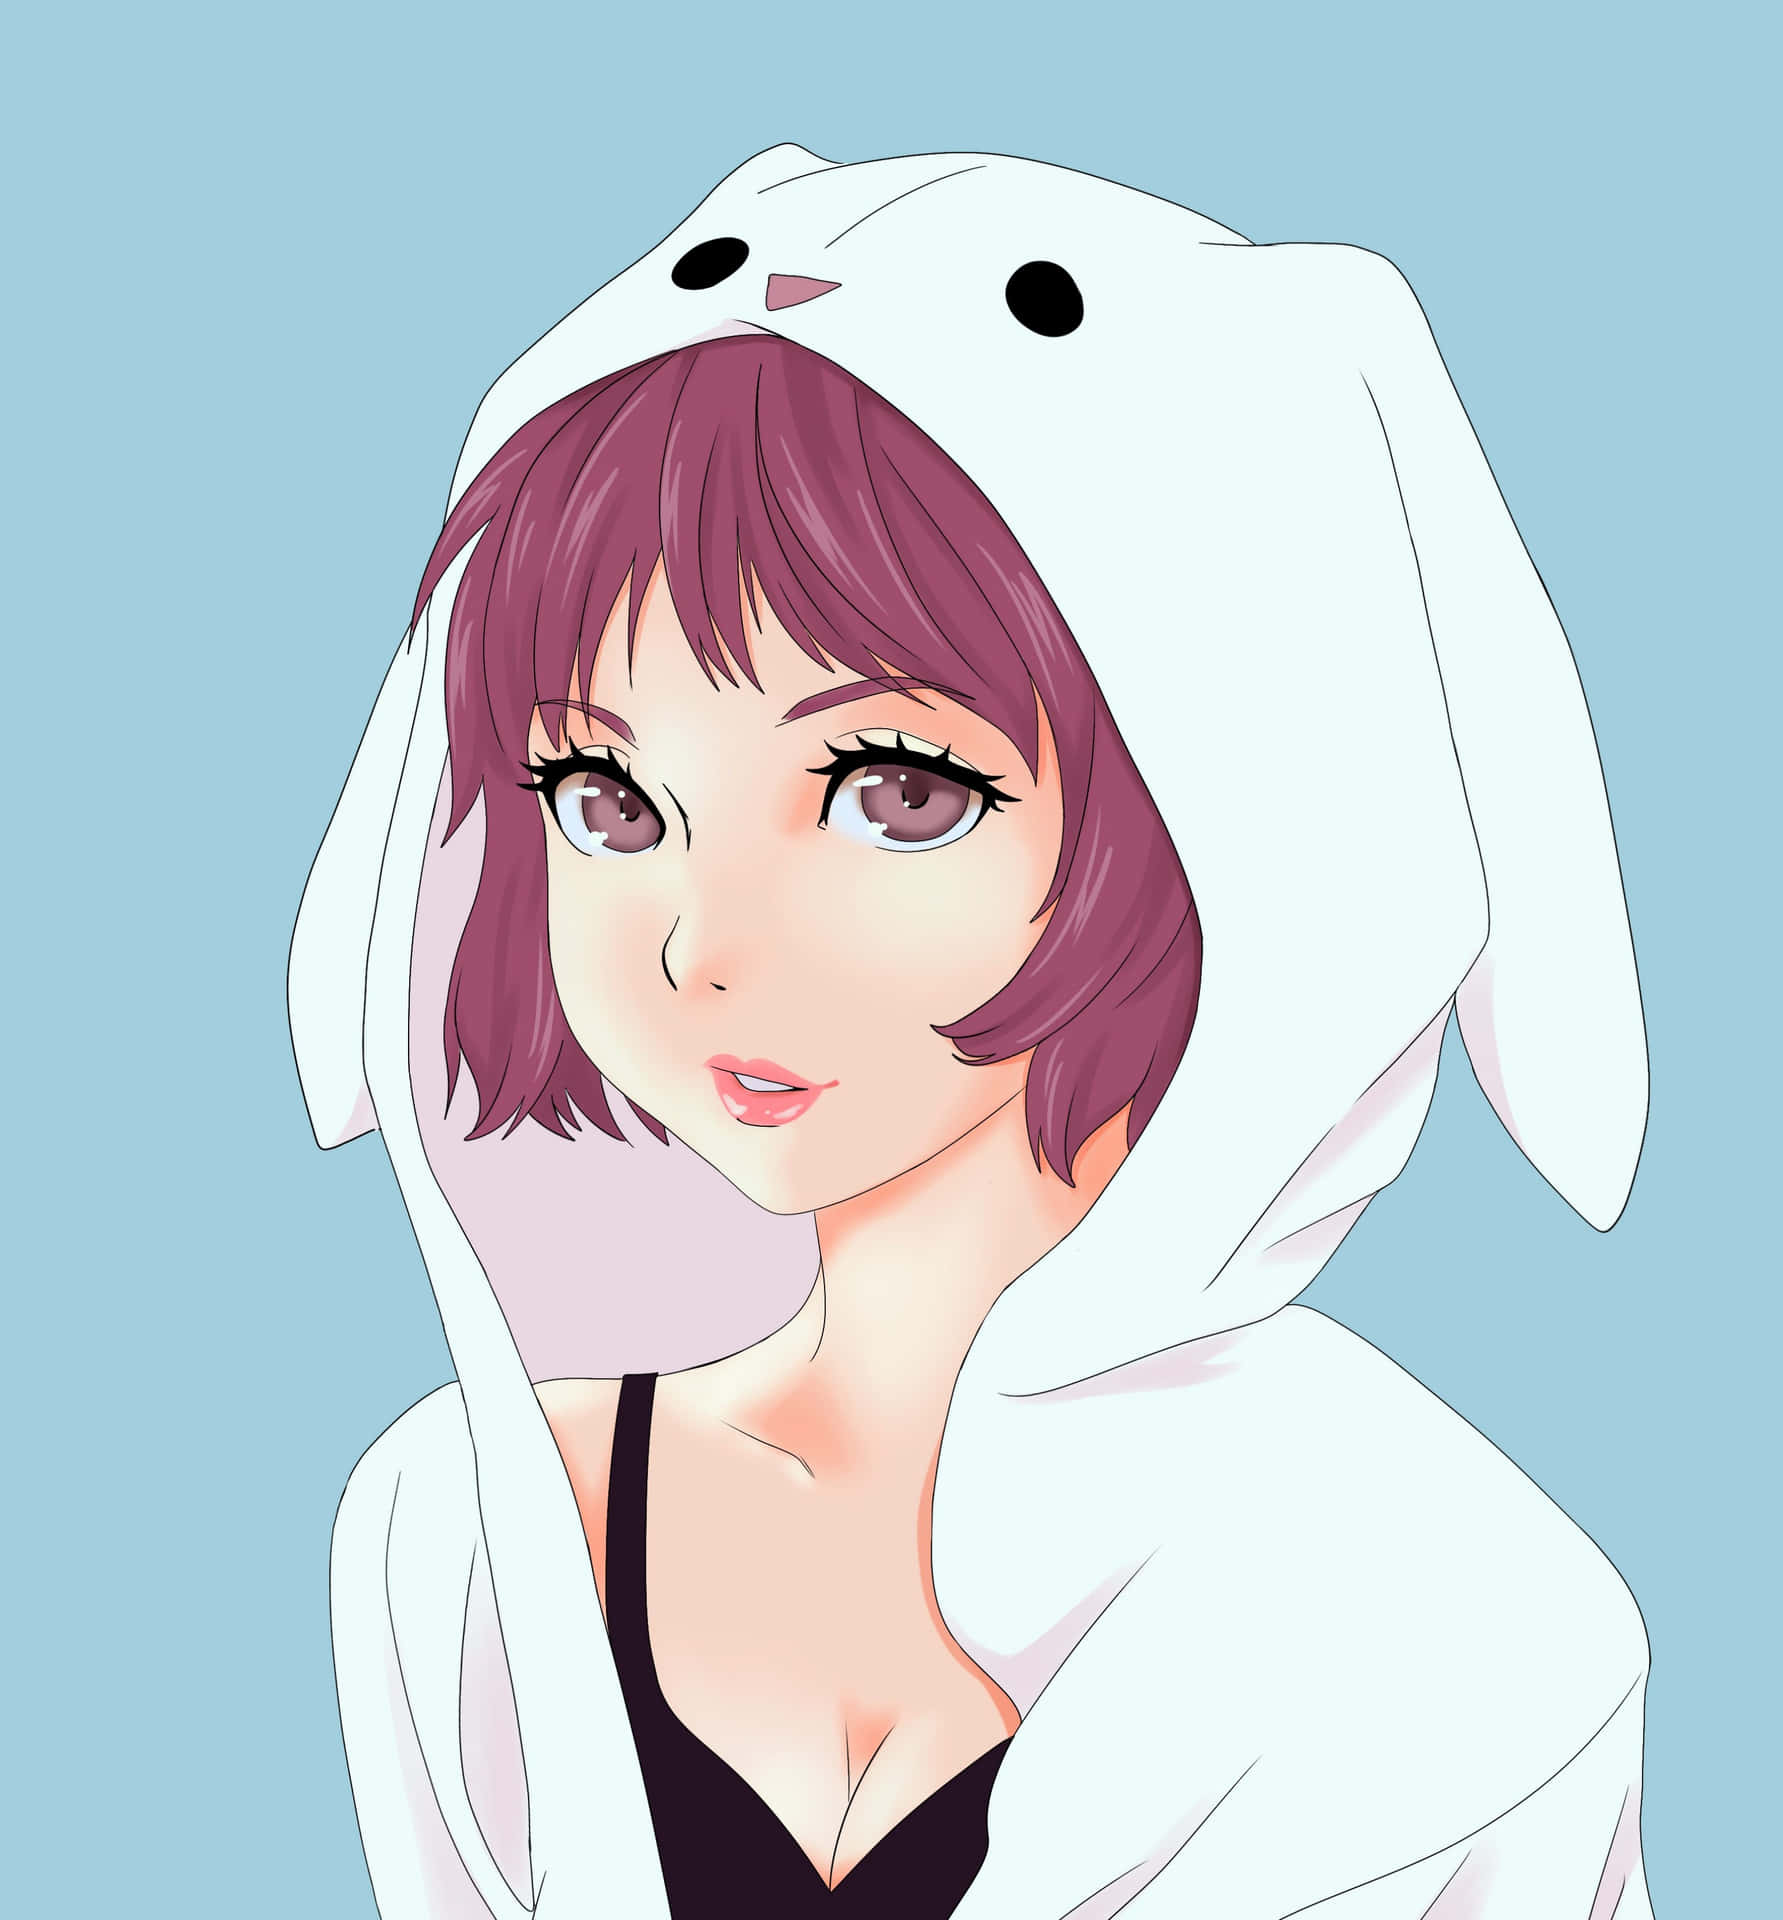 "Stay cozy this winter in this stylish anime girl hoodie!"